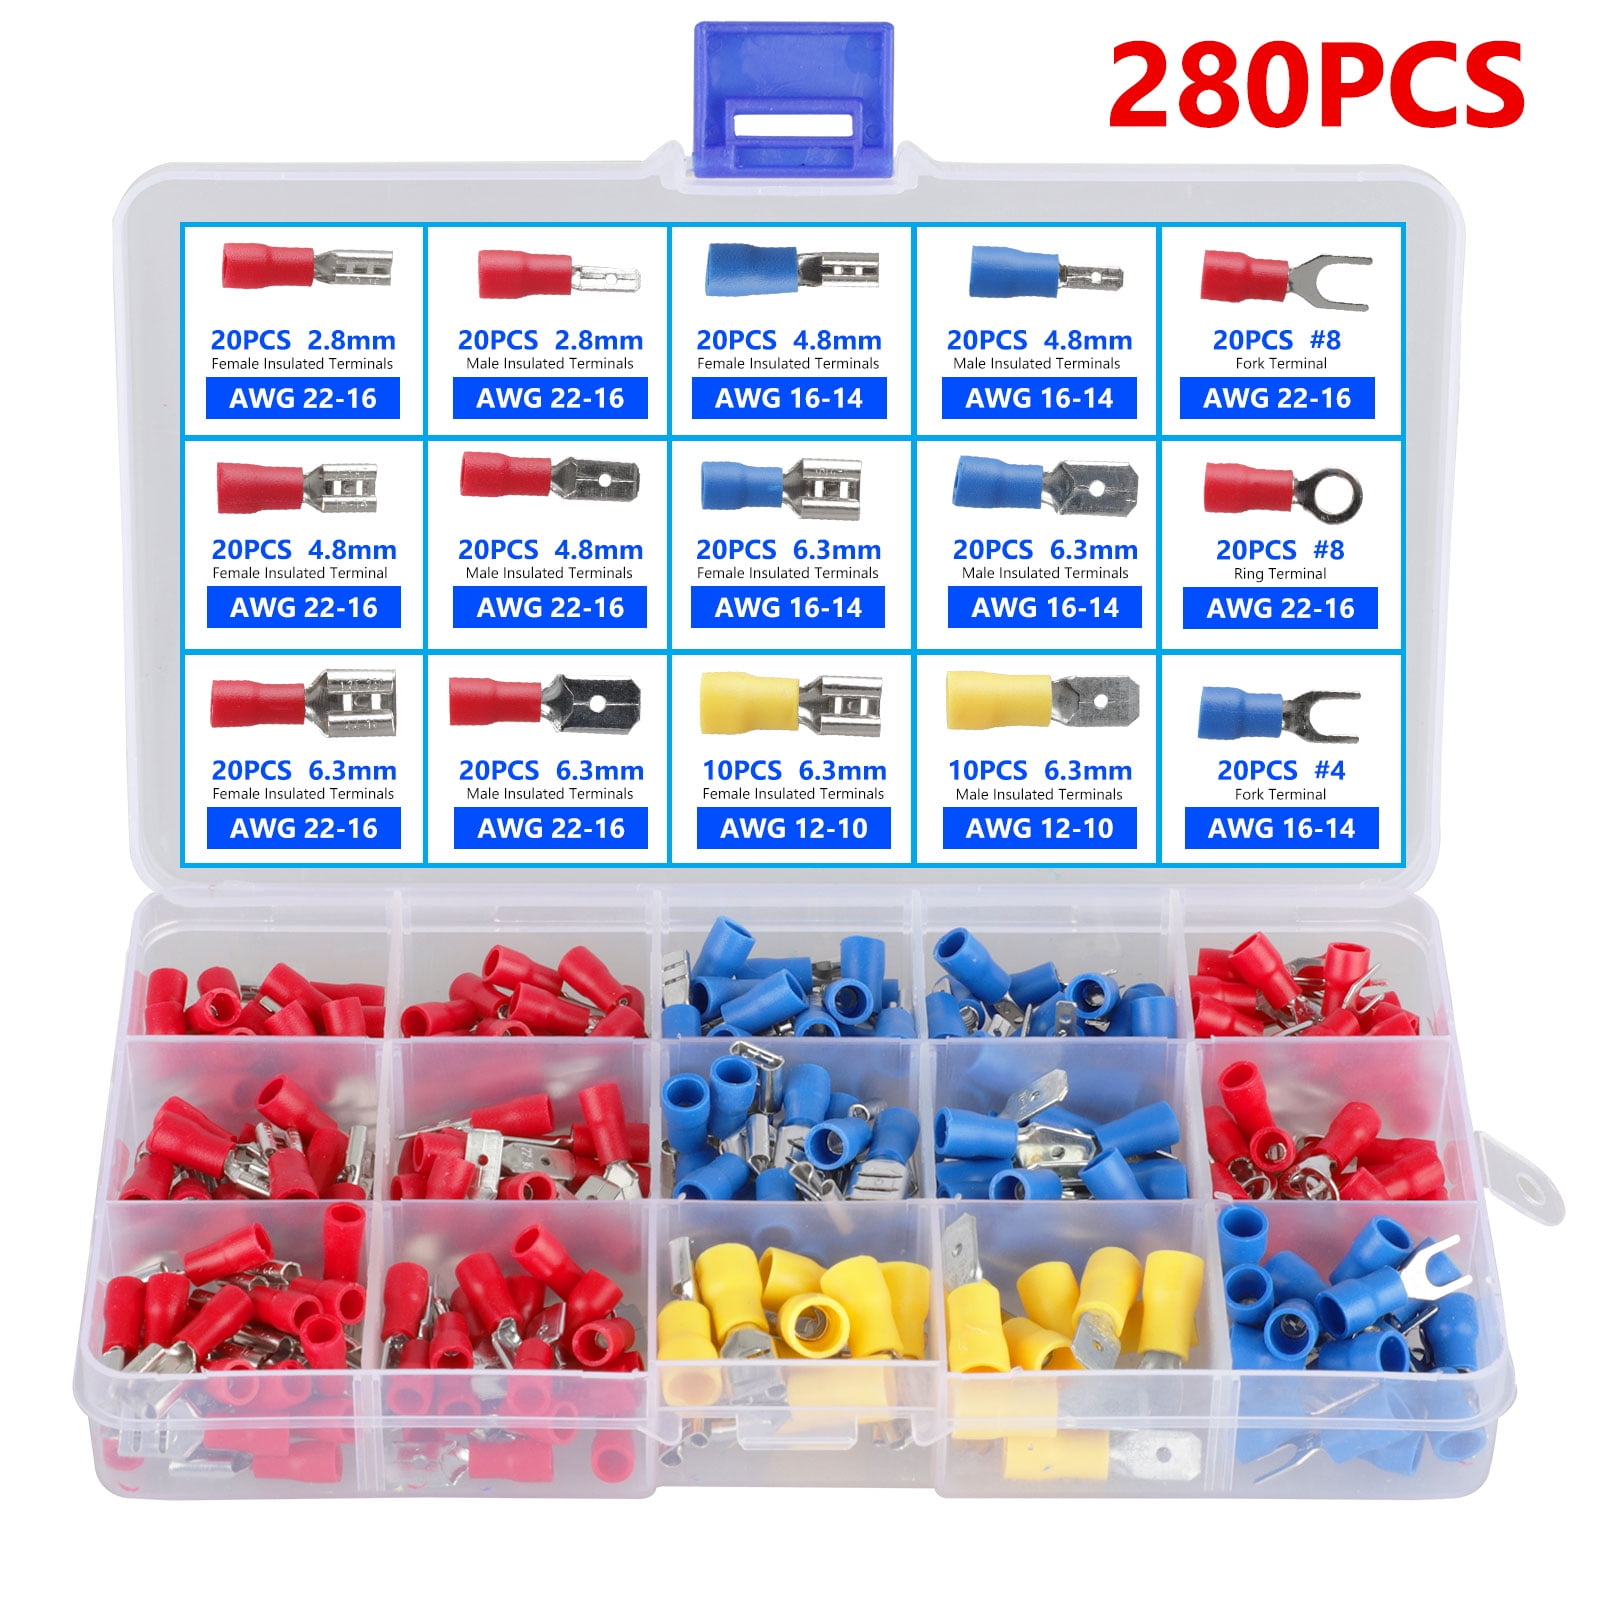 280PCS ASSORTED INSULATED ELECTRICAL WIRE TERMINALS CRIMP CONNECTORS SPADE SET 